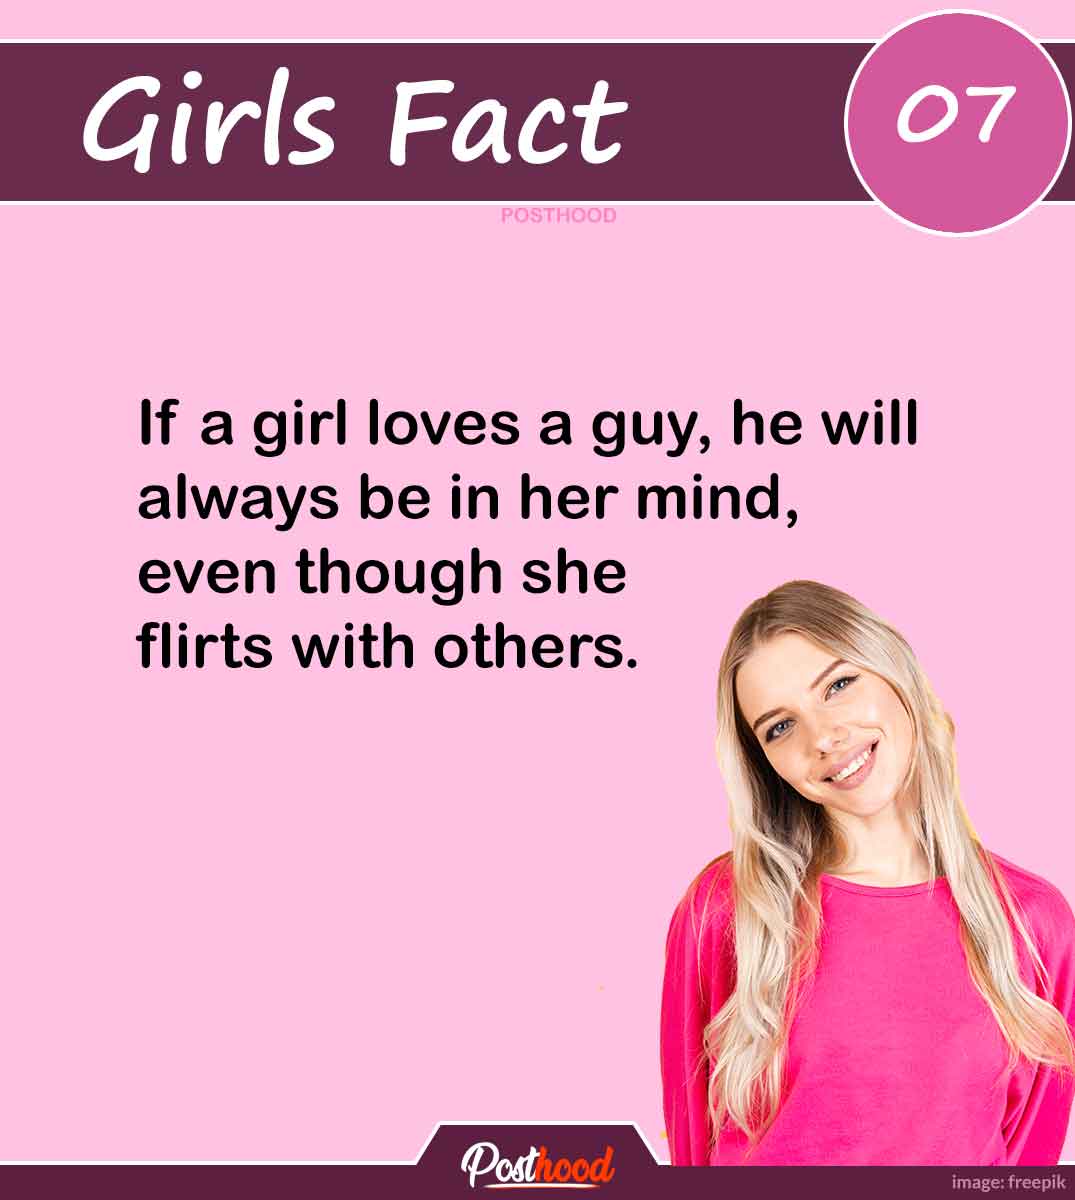 Read her mind with these interesting psychological facts about girls' love and feelings that will help you understand her a lot. 